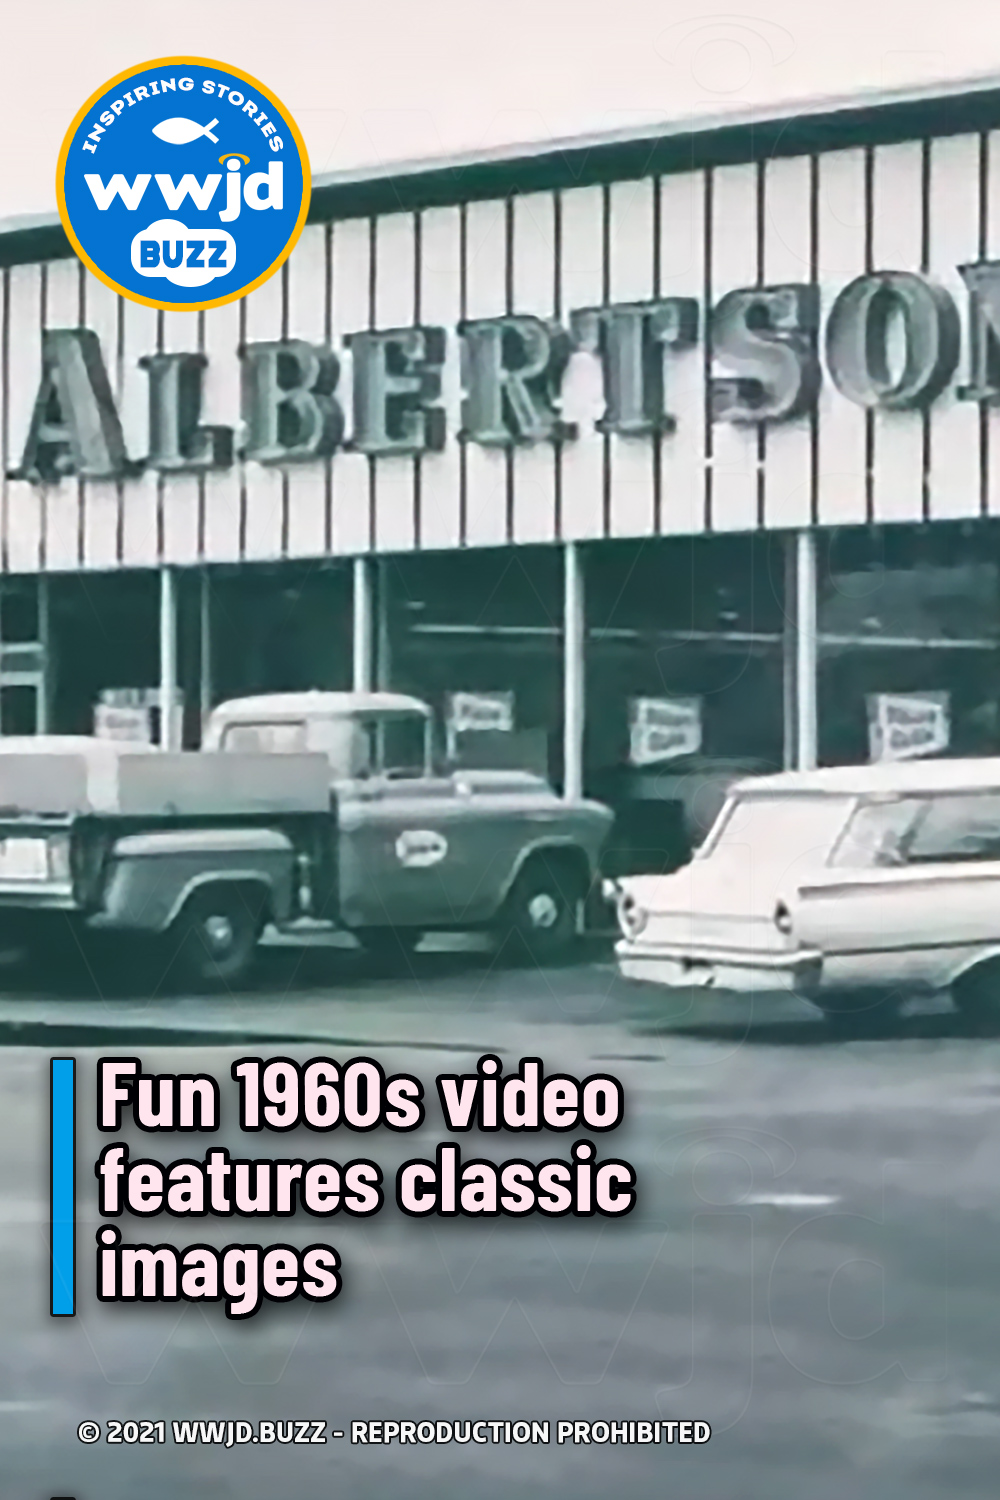 Fun 1960s video features classic images